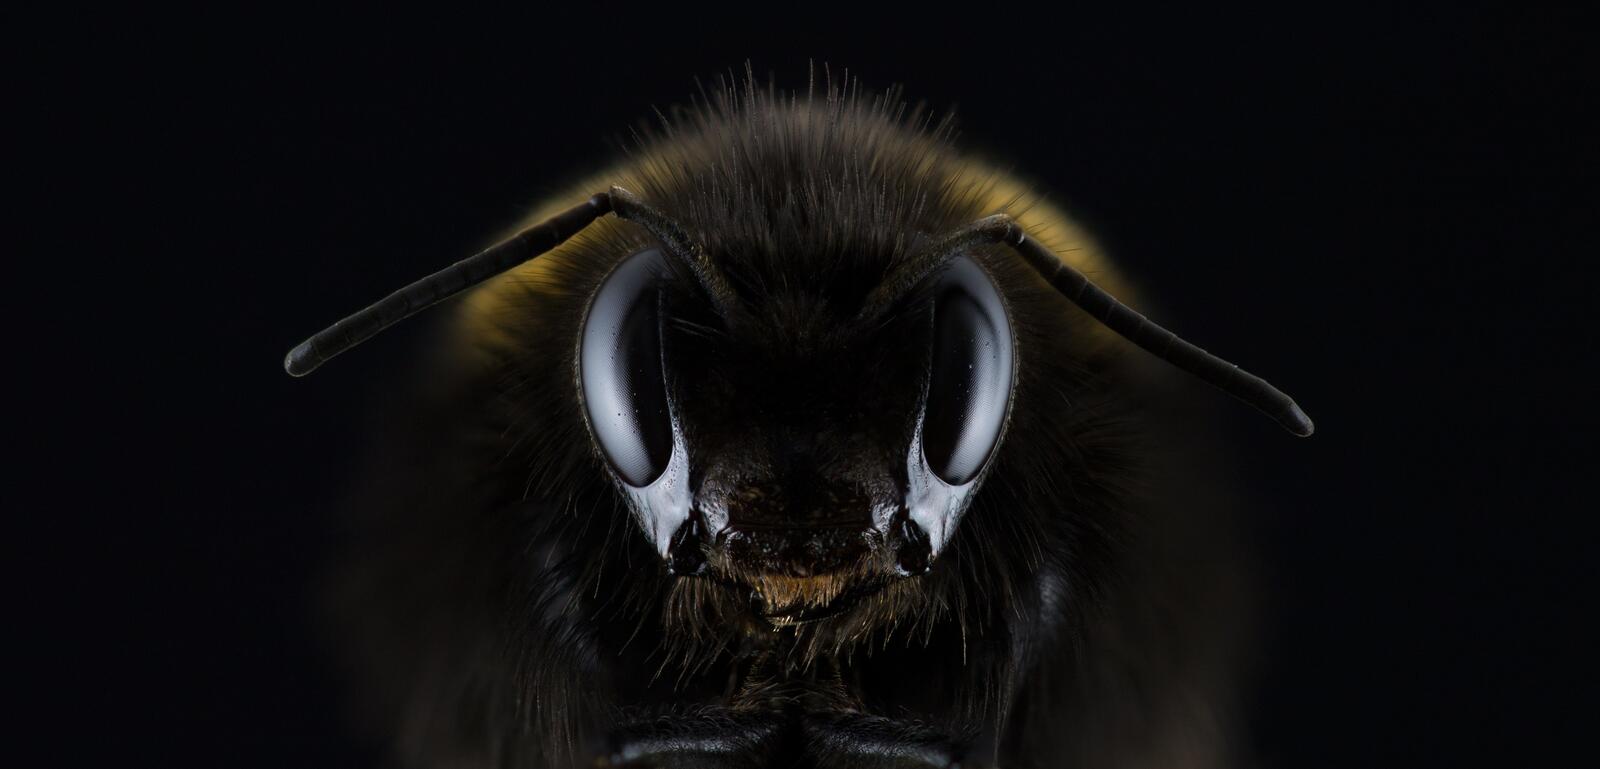 Free photo Bee head with big eyes on black background